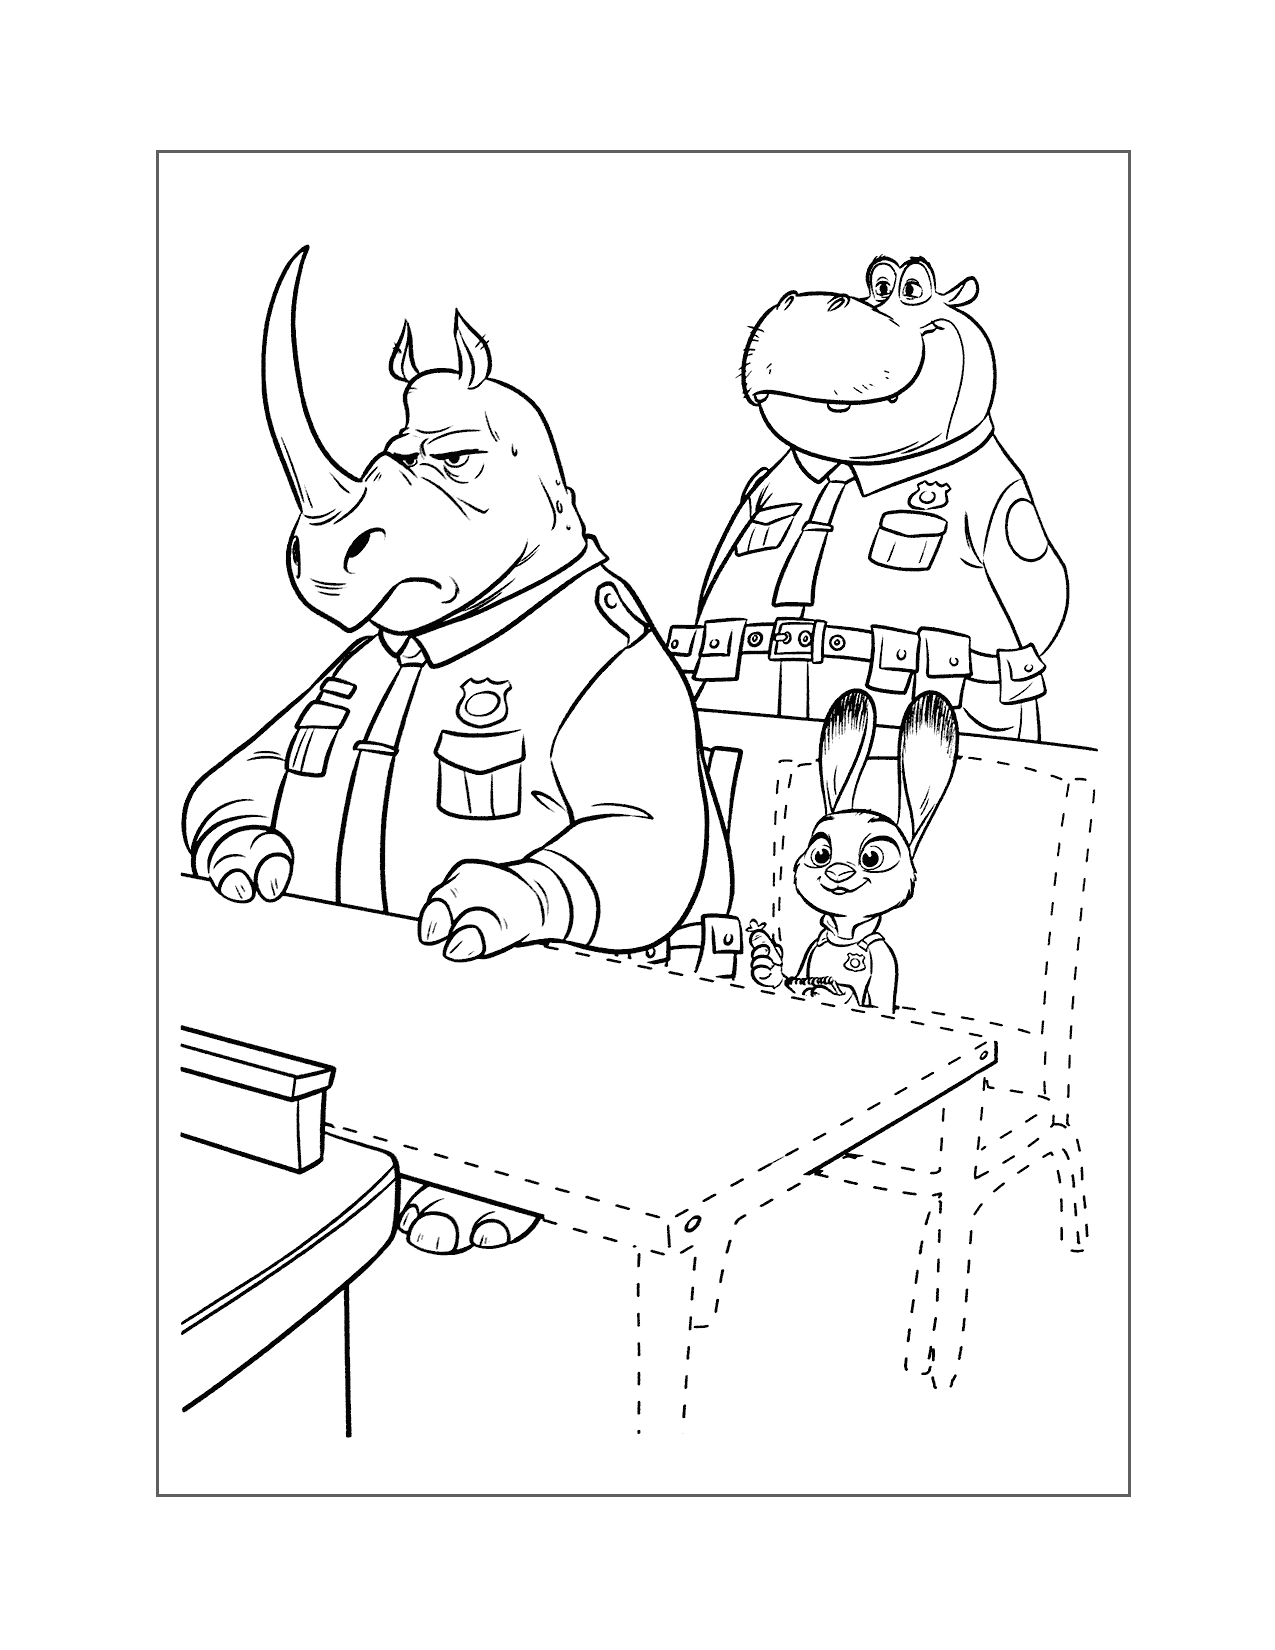 Officer Hopps First Assignment Zootopia Coloring Page